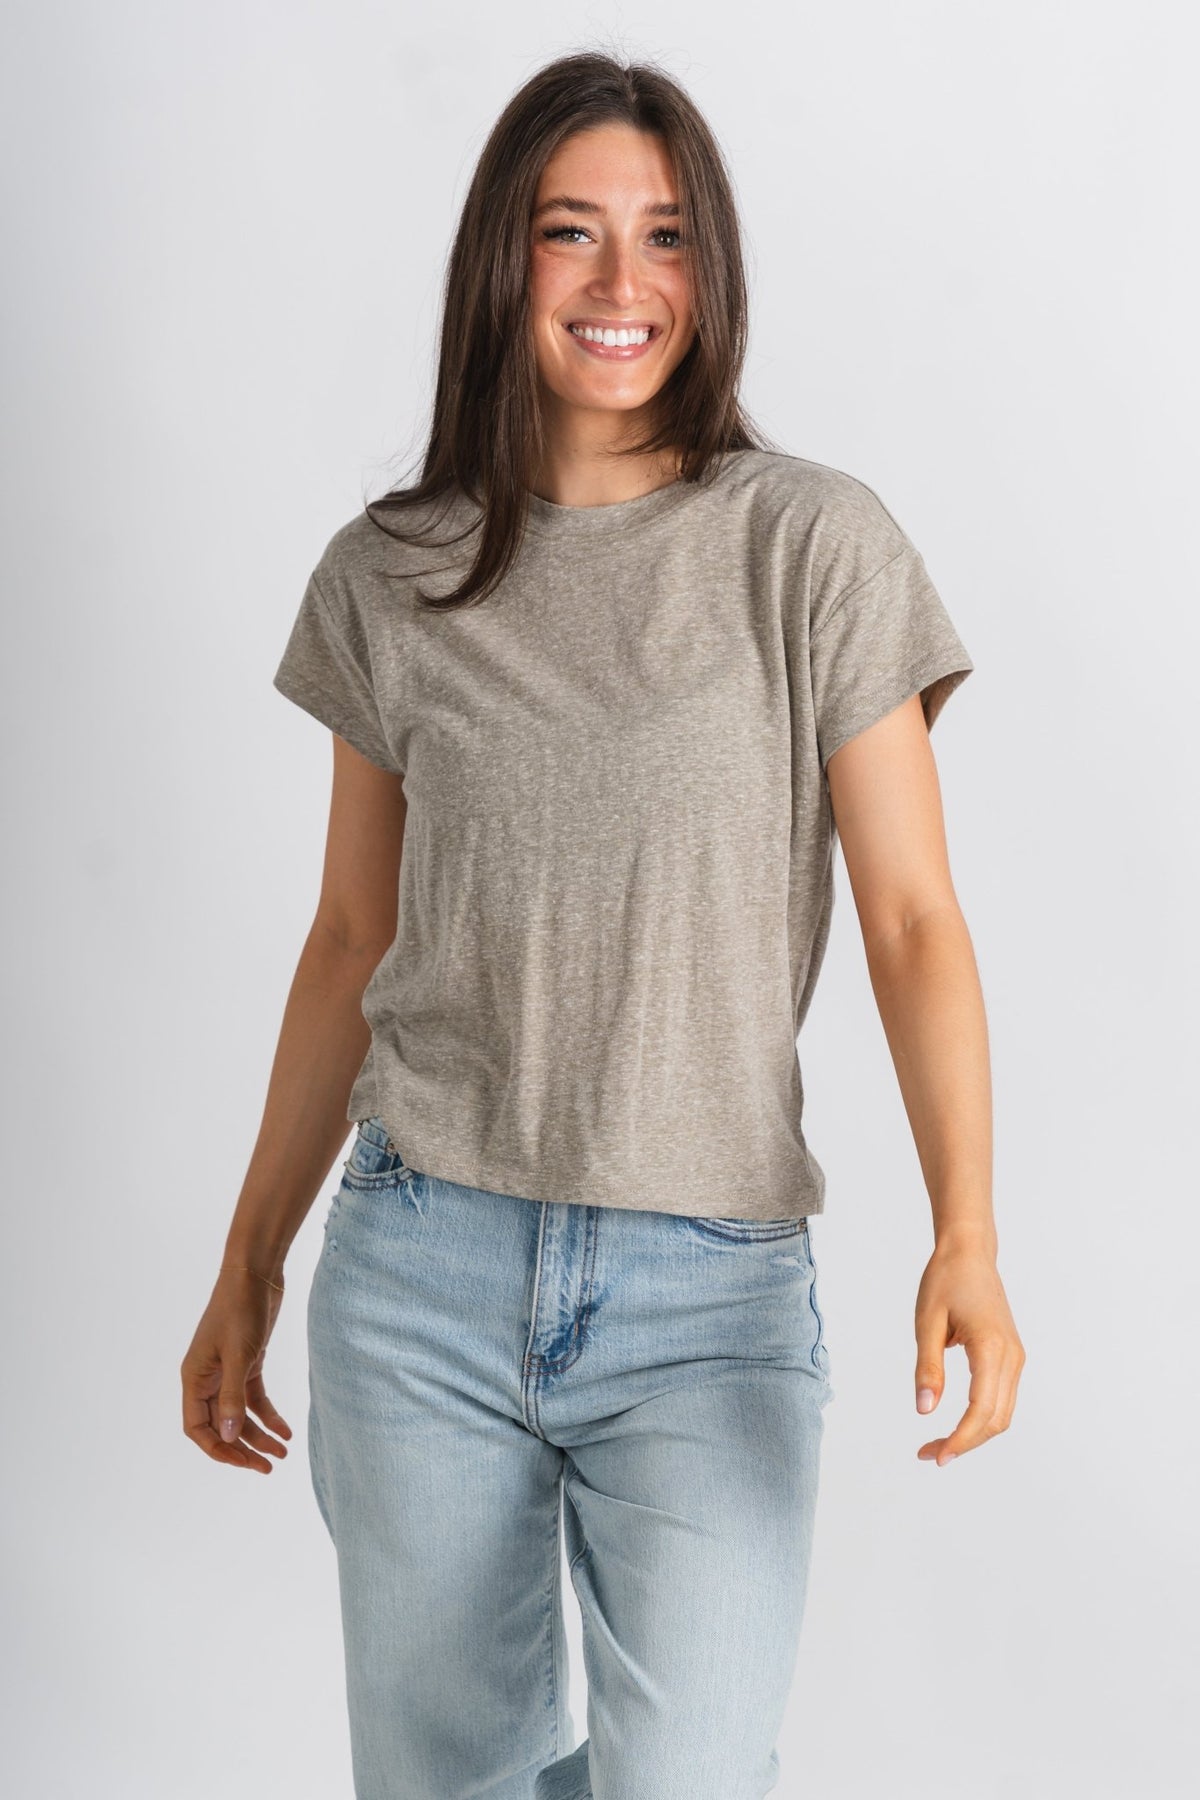 Z Supply modern tri blend tee willow - Z Supply T-shirts - Z Supply Tops, Dresses, Tanks, Tees, Cardigans, Joggers and Loungewear at Lush Fashion Lounge